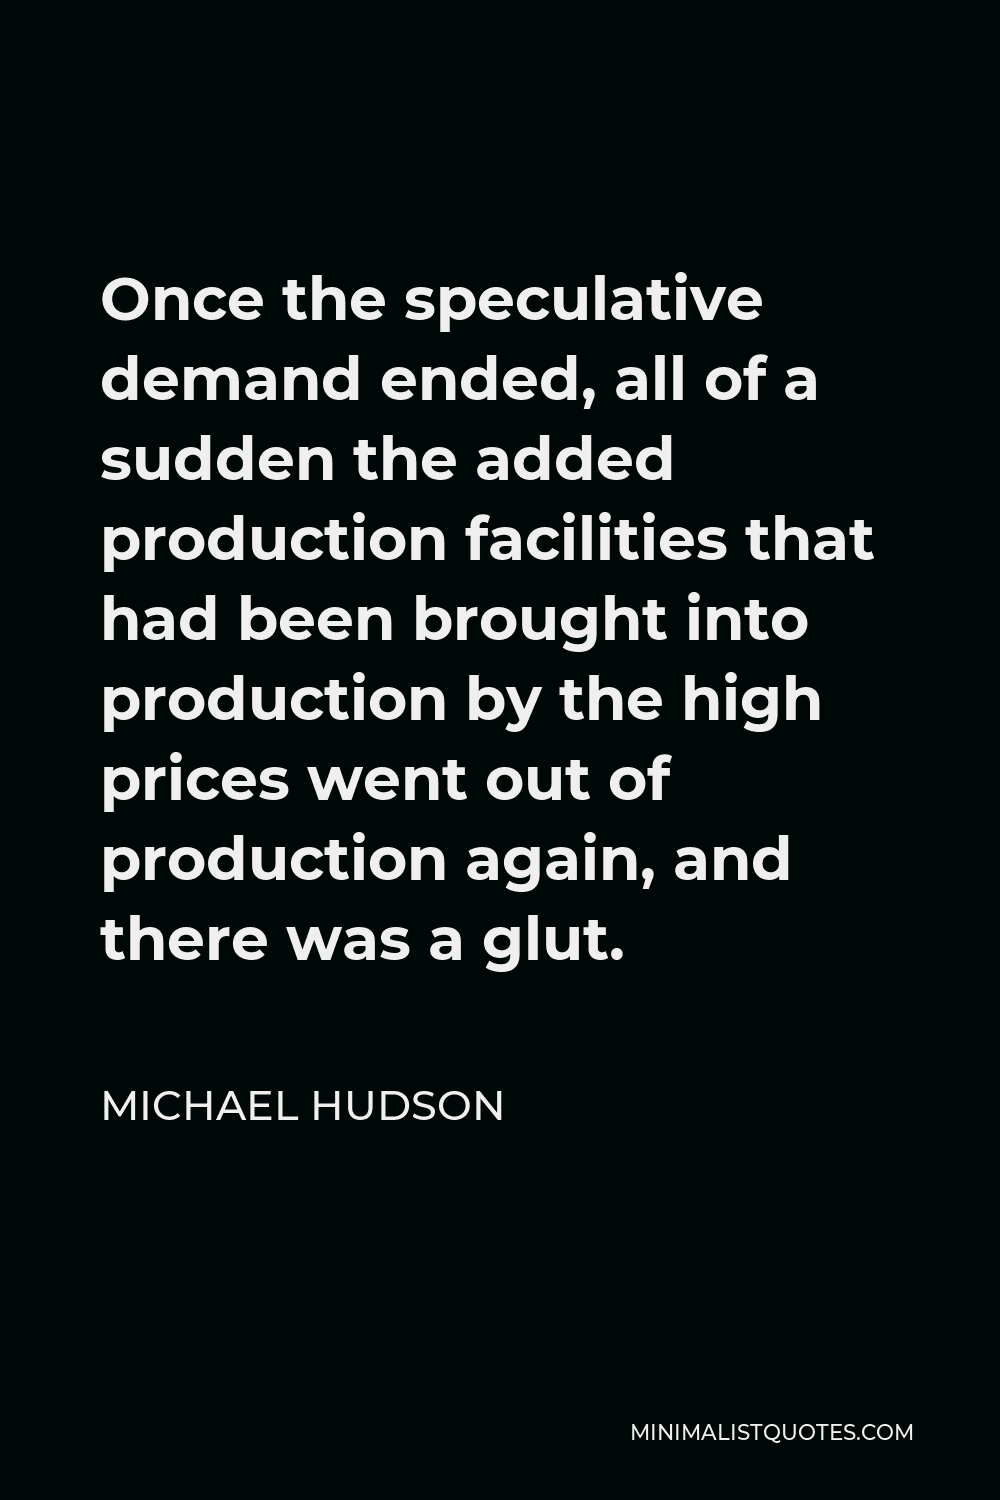 Michael Hudson Quote - Once the speculative demand ended, all of a sudden the added production facilities that had been brought into production by the high prices went out of production again, and there was a glut.